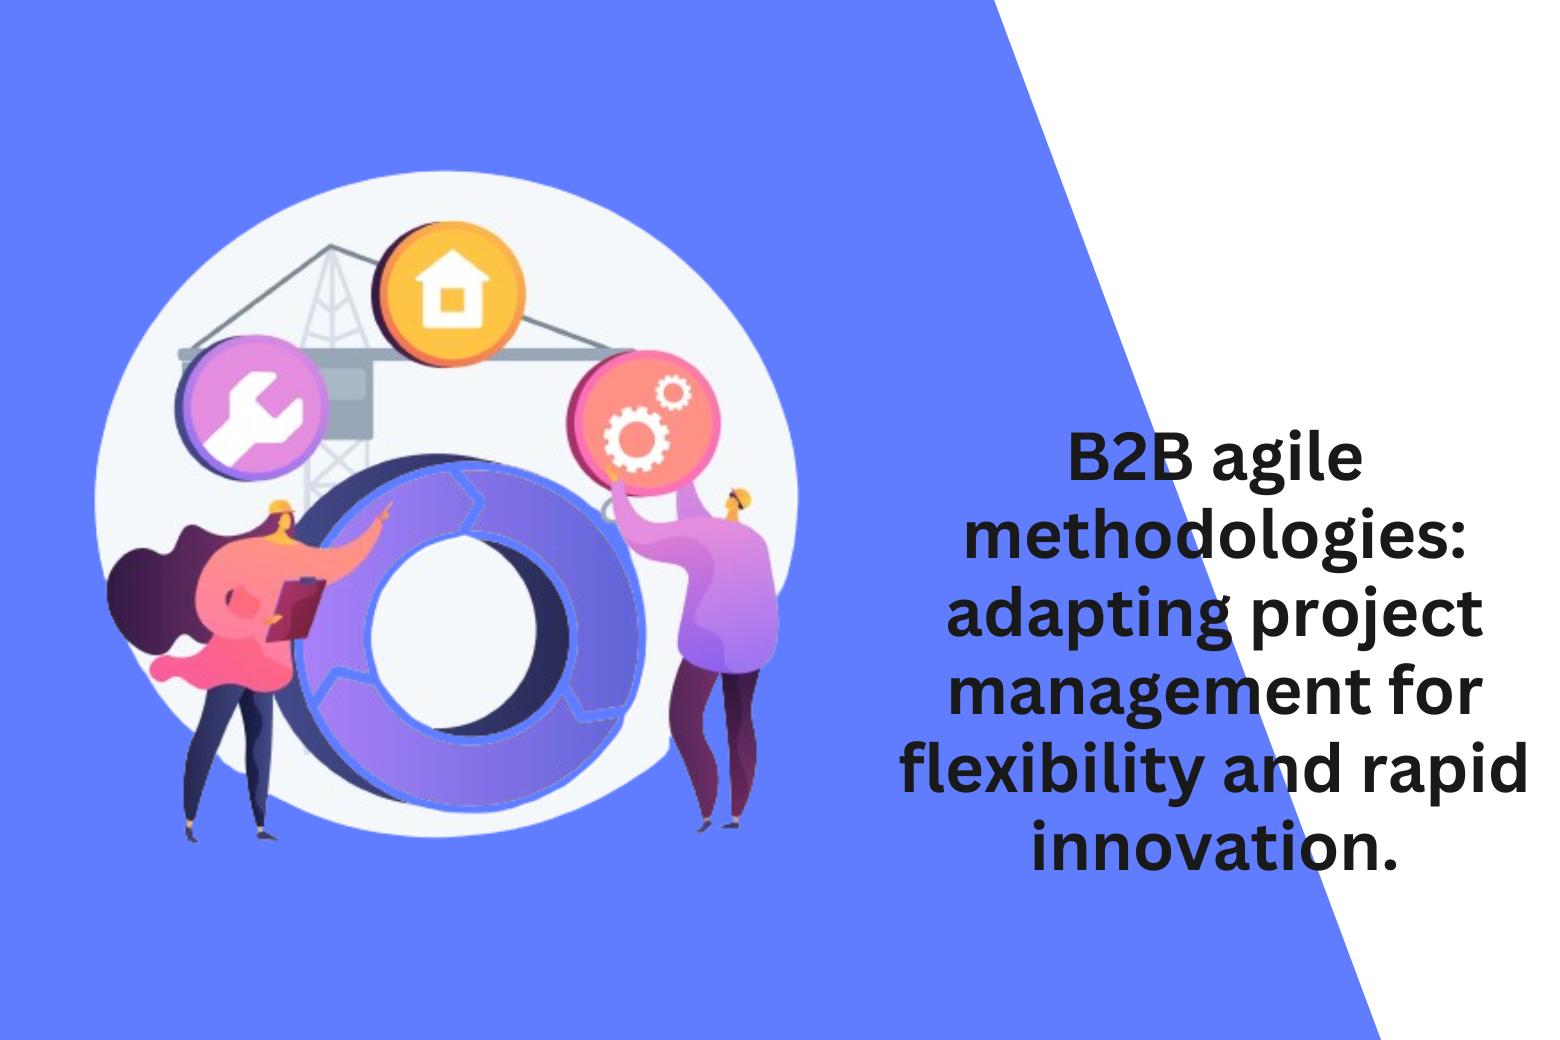 B2B agile methodologies: adapting project management for flexibility and rapid innovation.